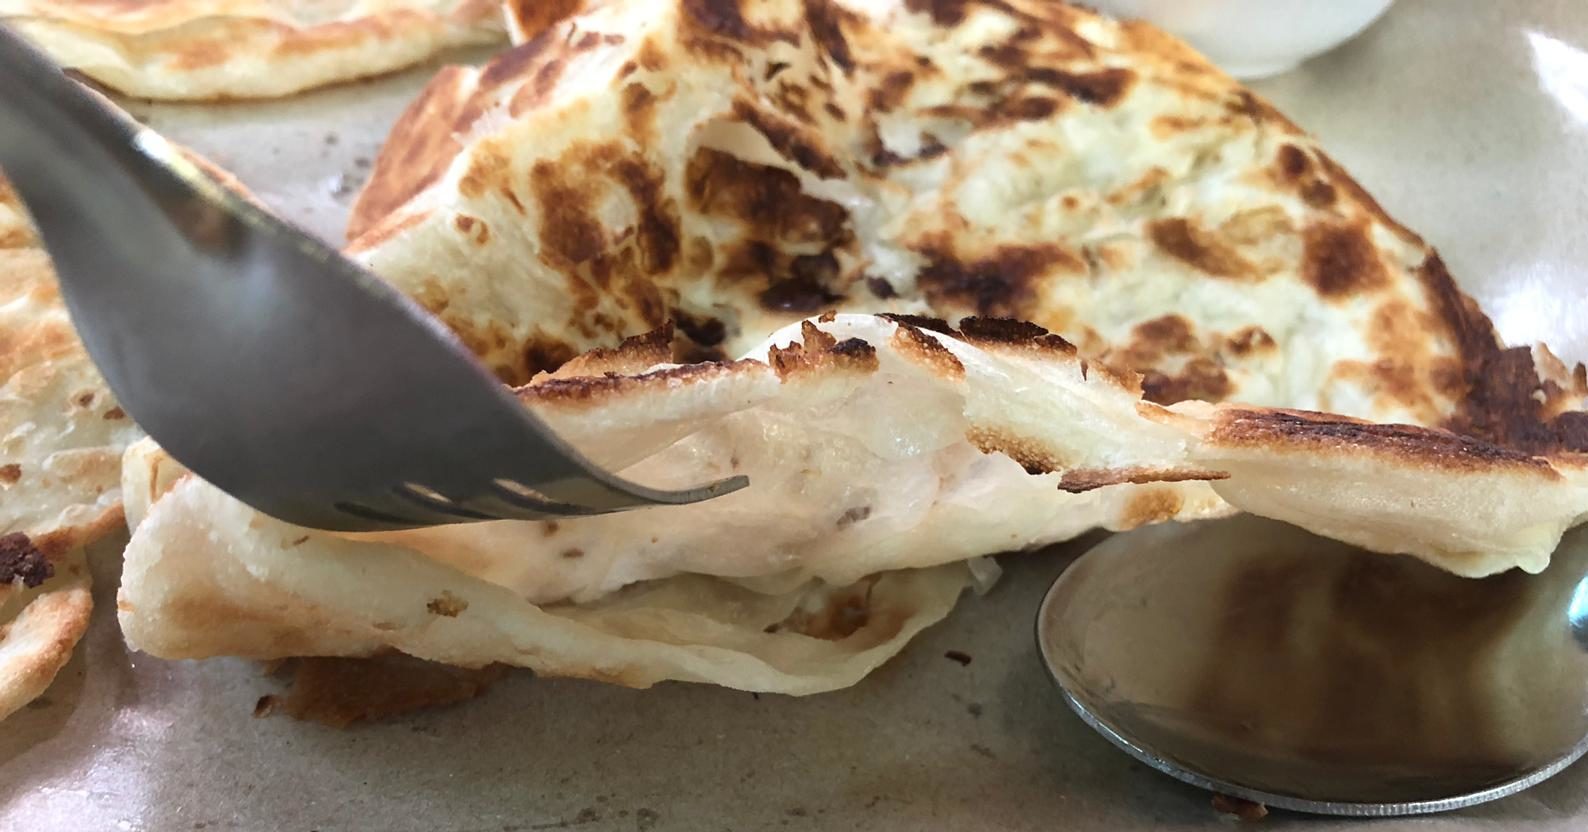 Look for the "seam" in a good prata.